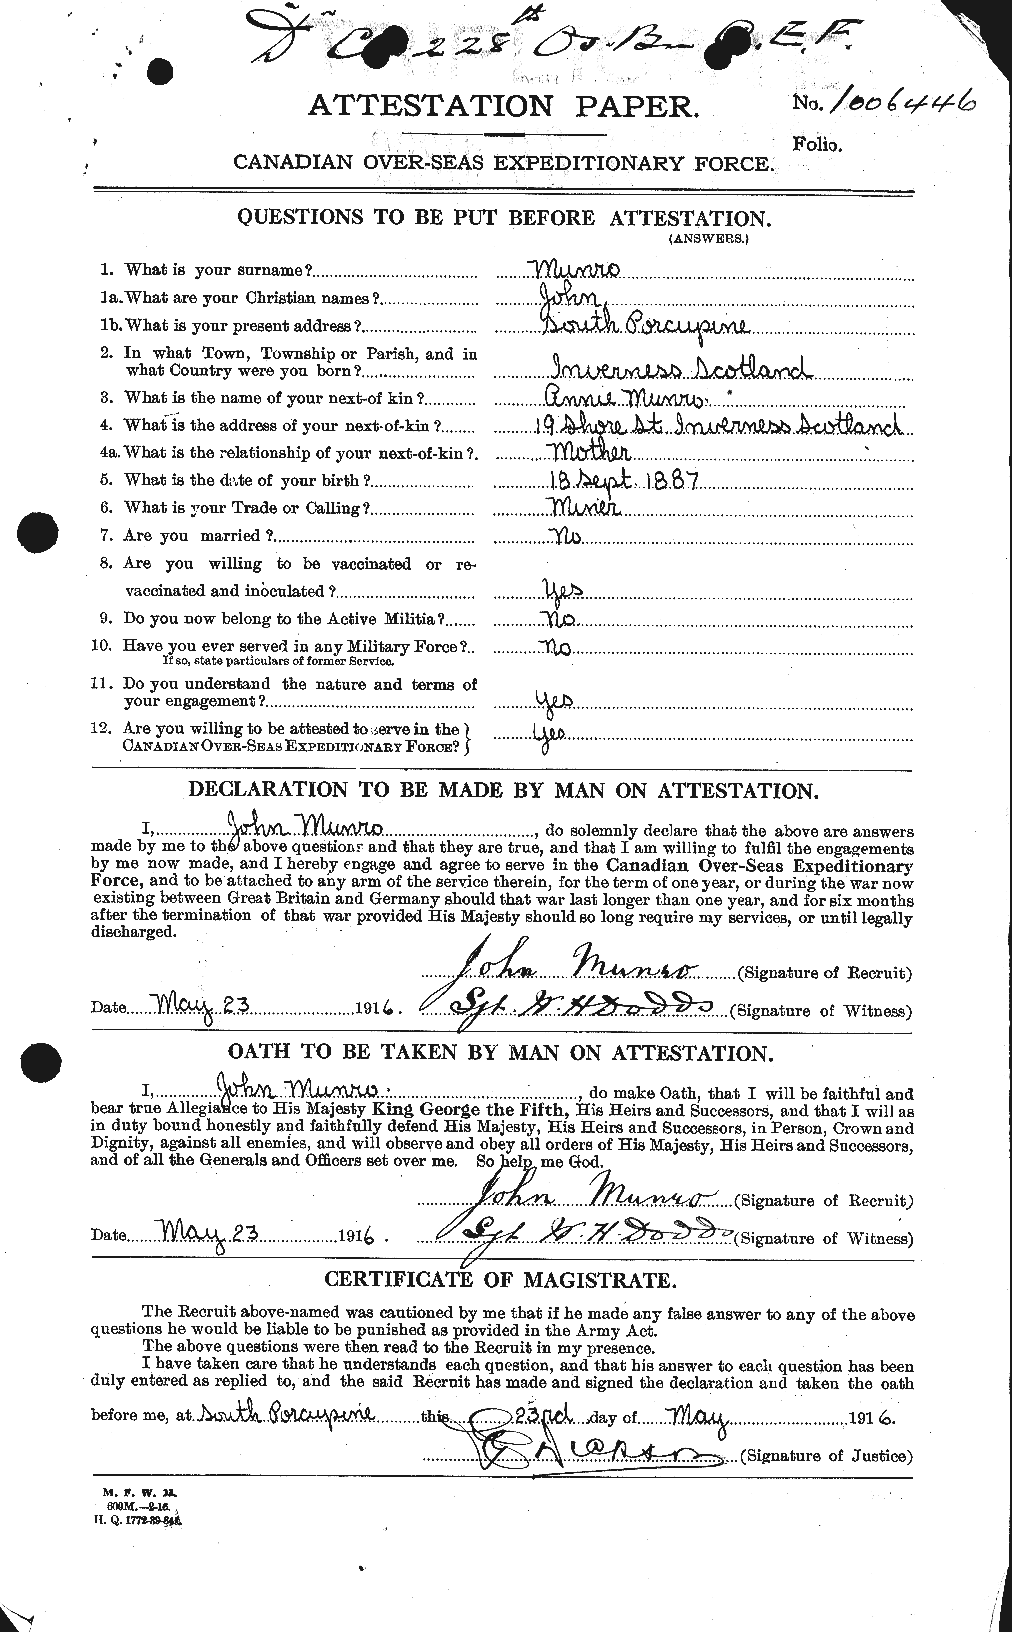 Personnel Records of the First World War - CEF 513944a